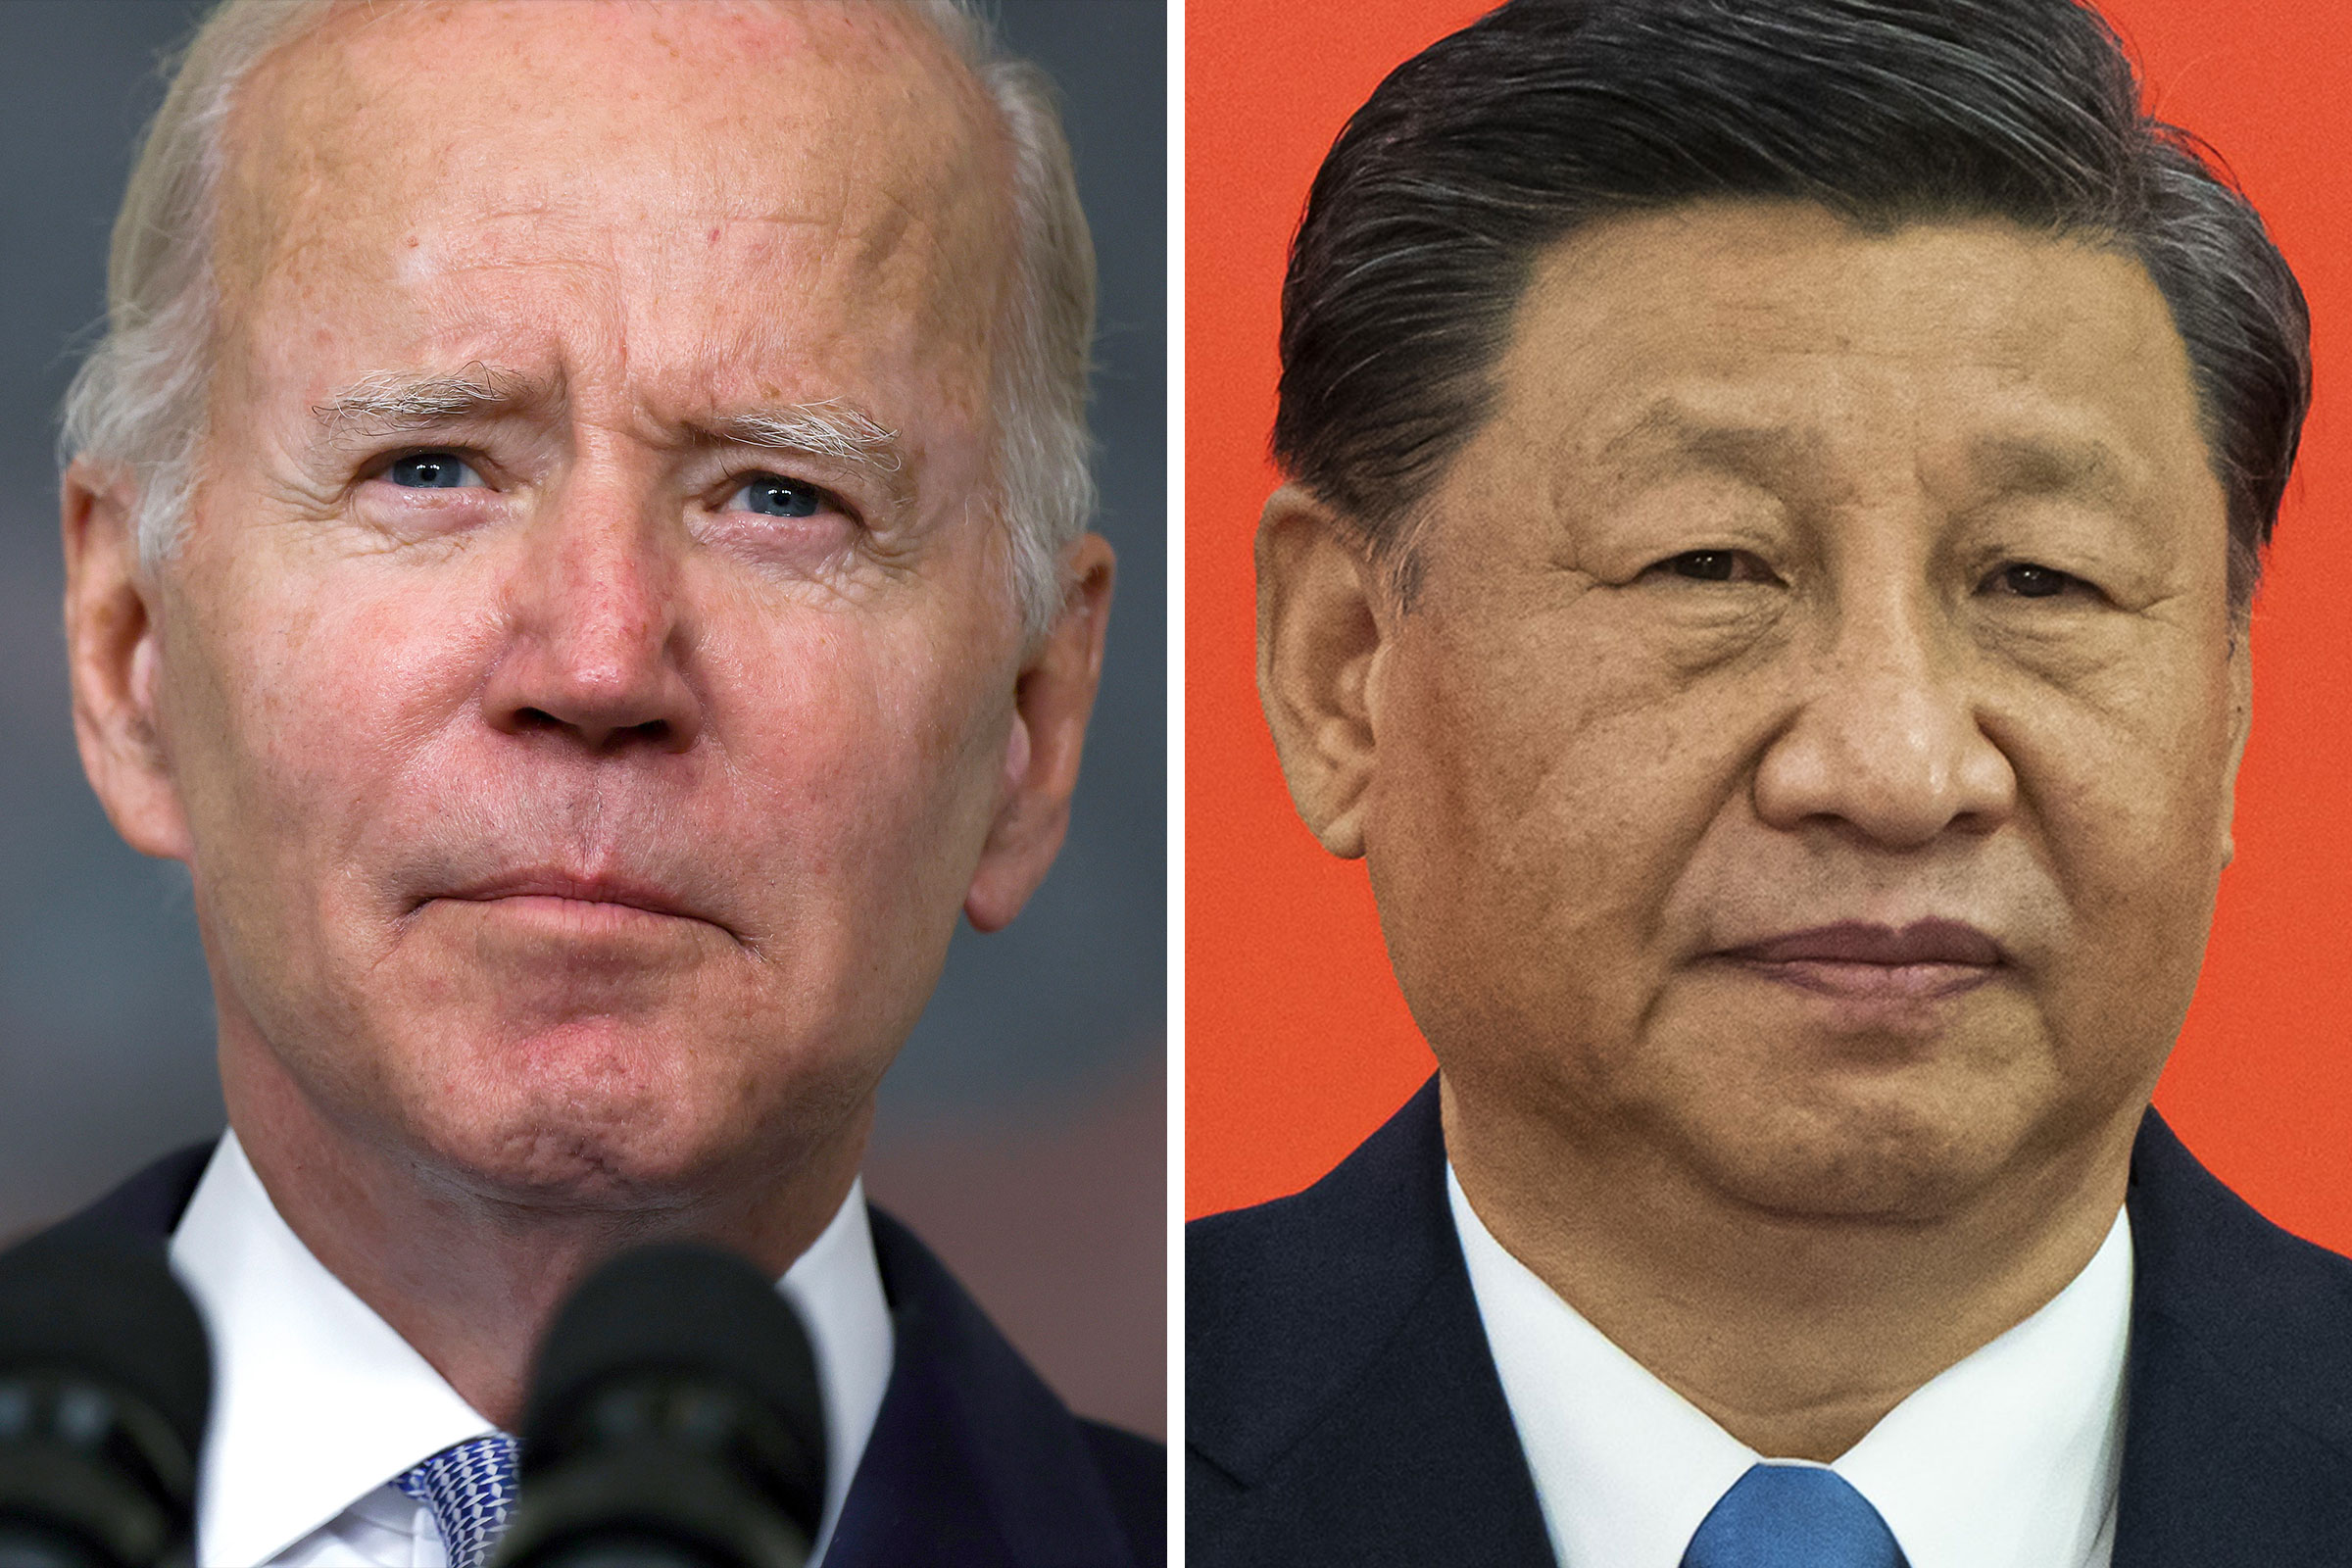 President Joe Biden delivers remarks in the State Dining Room of the White House on July 28, 2022; China's President Xi Jinping at the West Kowloon Station in Hong Kong, on June 30, 2022. (Anna Moneymaker—Getty Images; Justin Chin—Bloomberg/Getty Images)